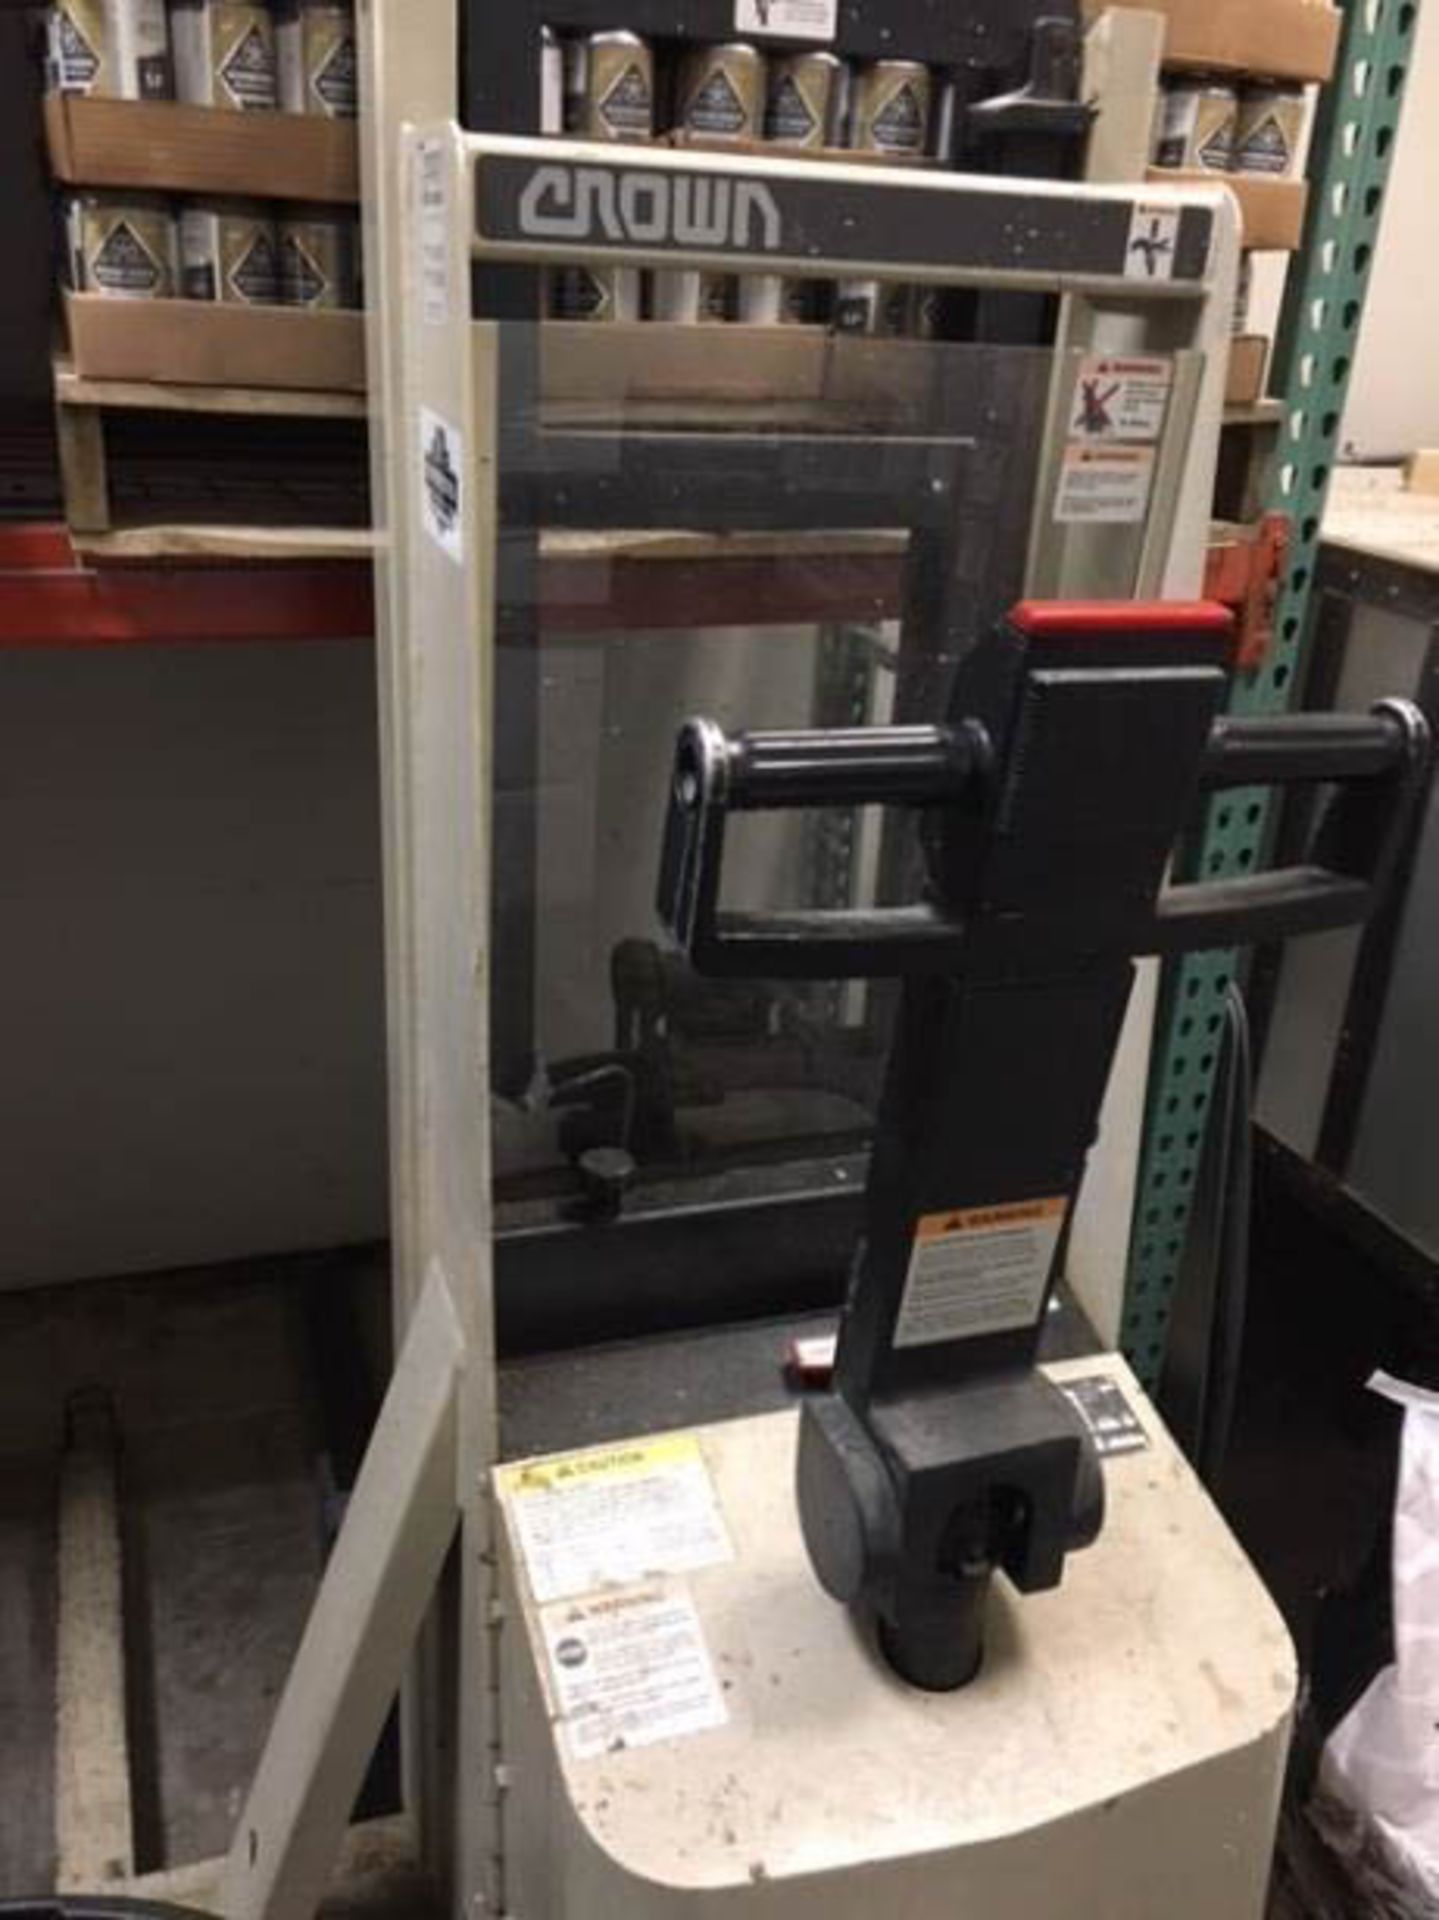 Crown High-Lift Electric Pallet Jack, 2,000 LB Capacity, S/N: 1A445541 - Rigging Fee: $100 - Image 3 of 3